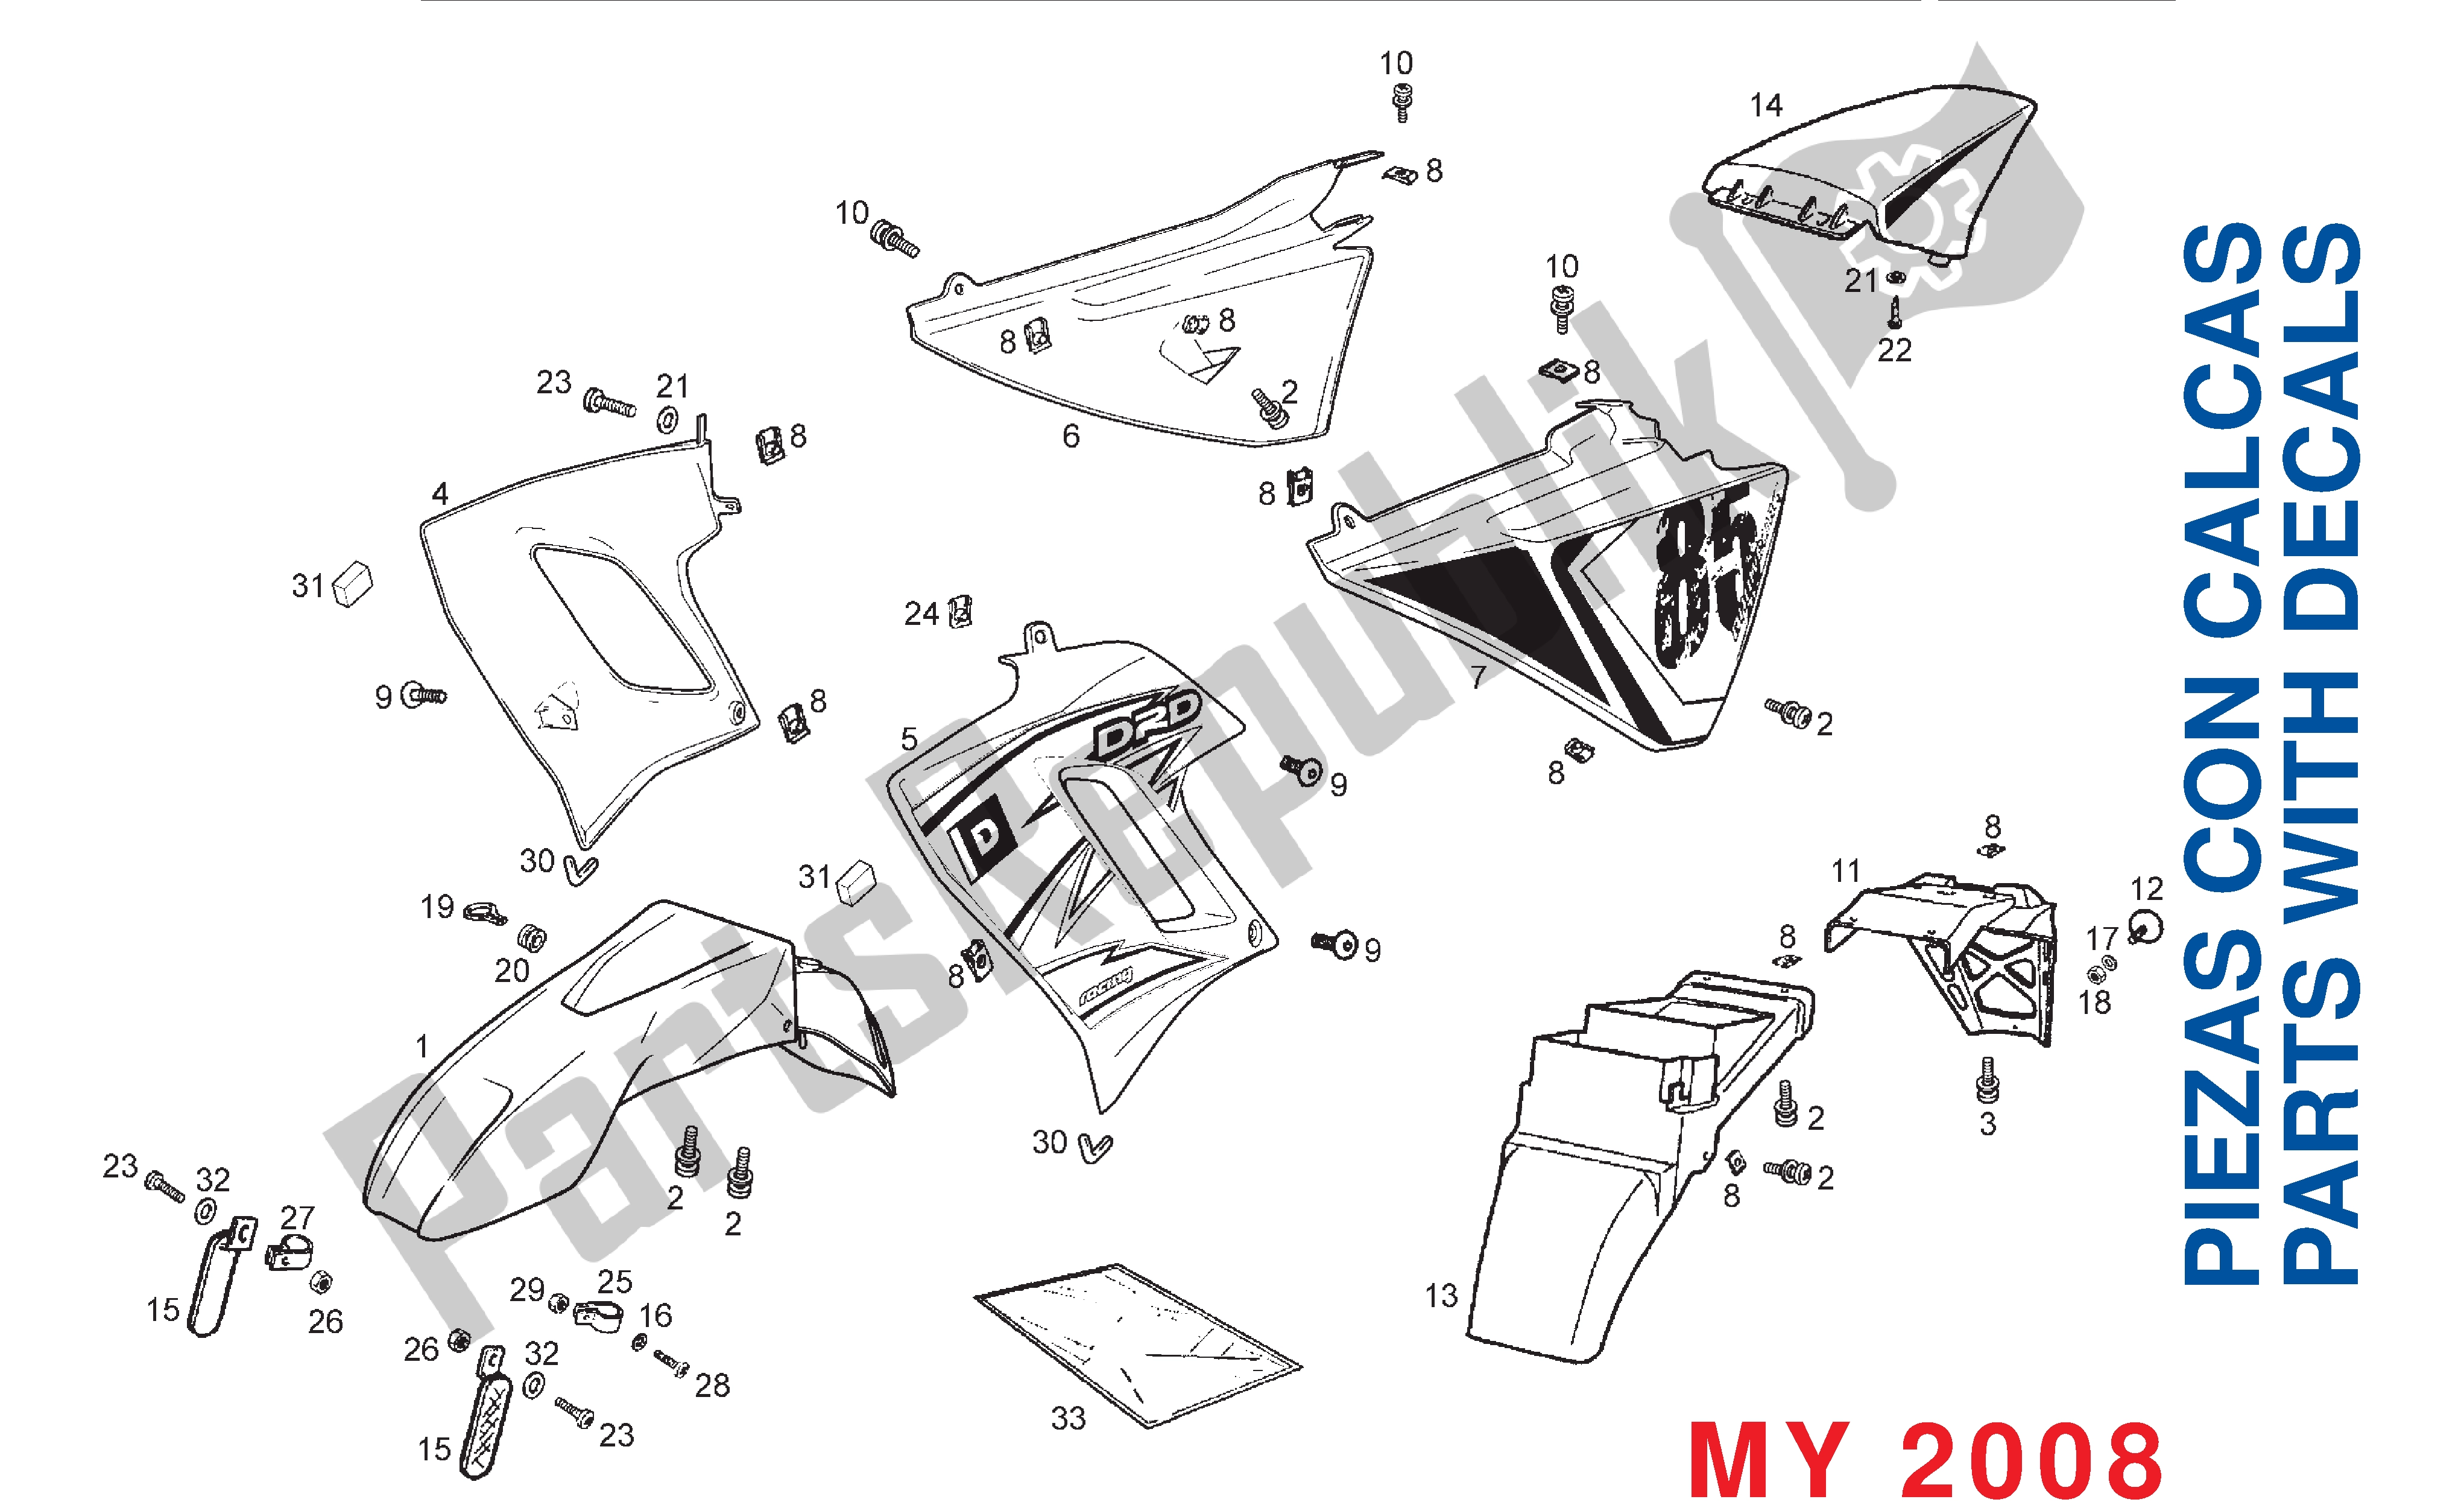 All parts for the Chassis Components (2008 Model) of the Derbi Senda DRD SM 50 2005 - 2008